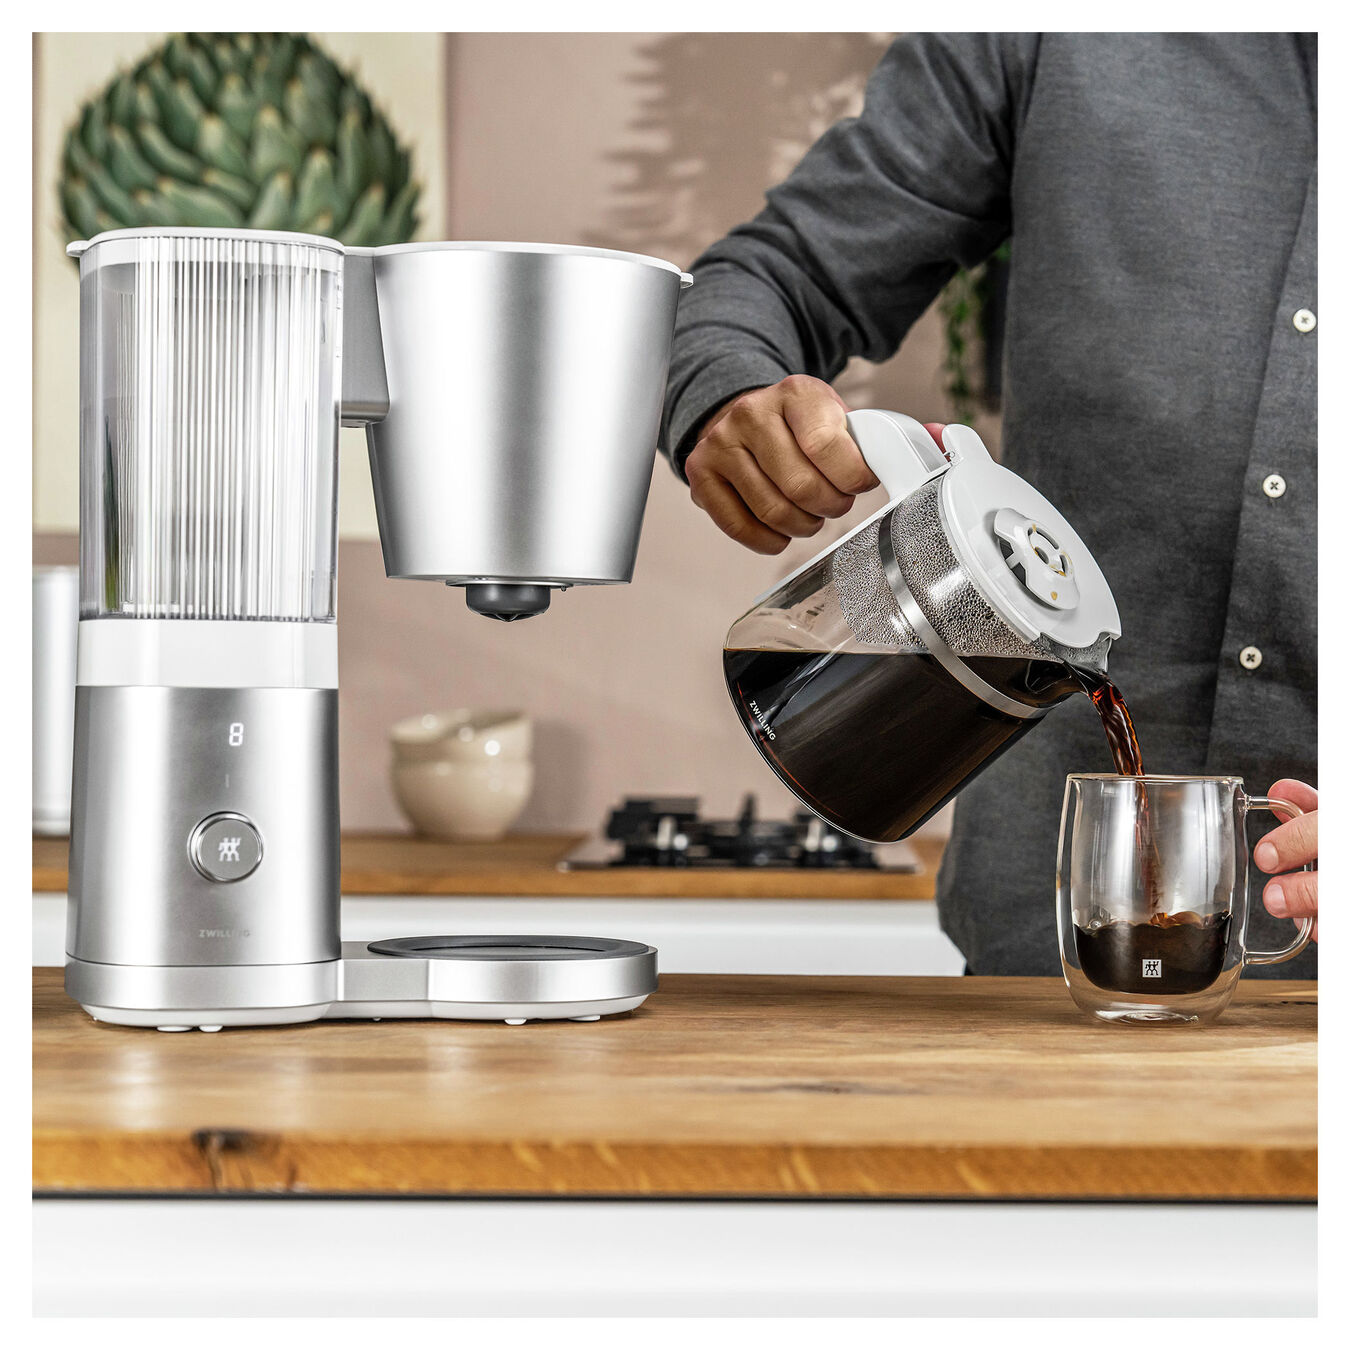 Buy ZWILLING Enfinigy Drip coffee maker | ZWILLING.COM